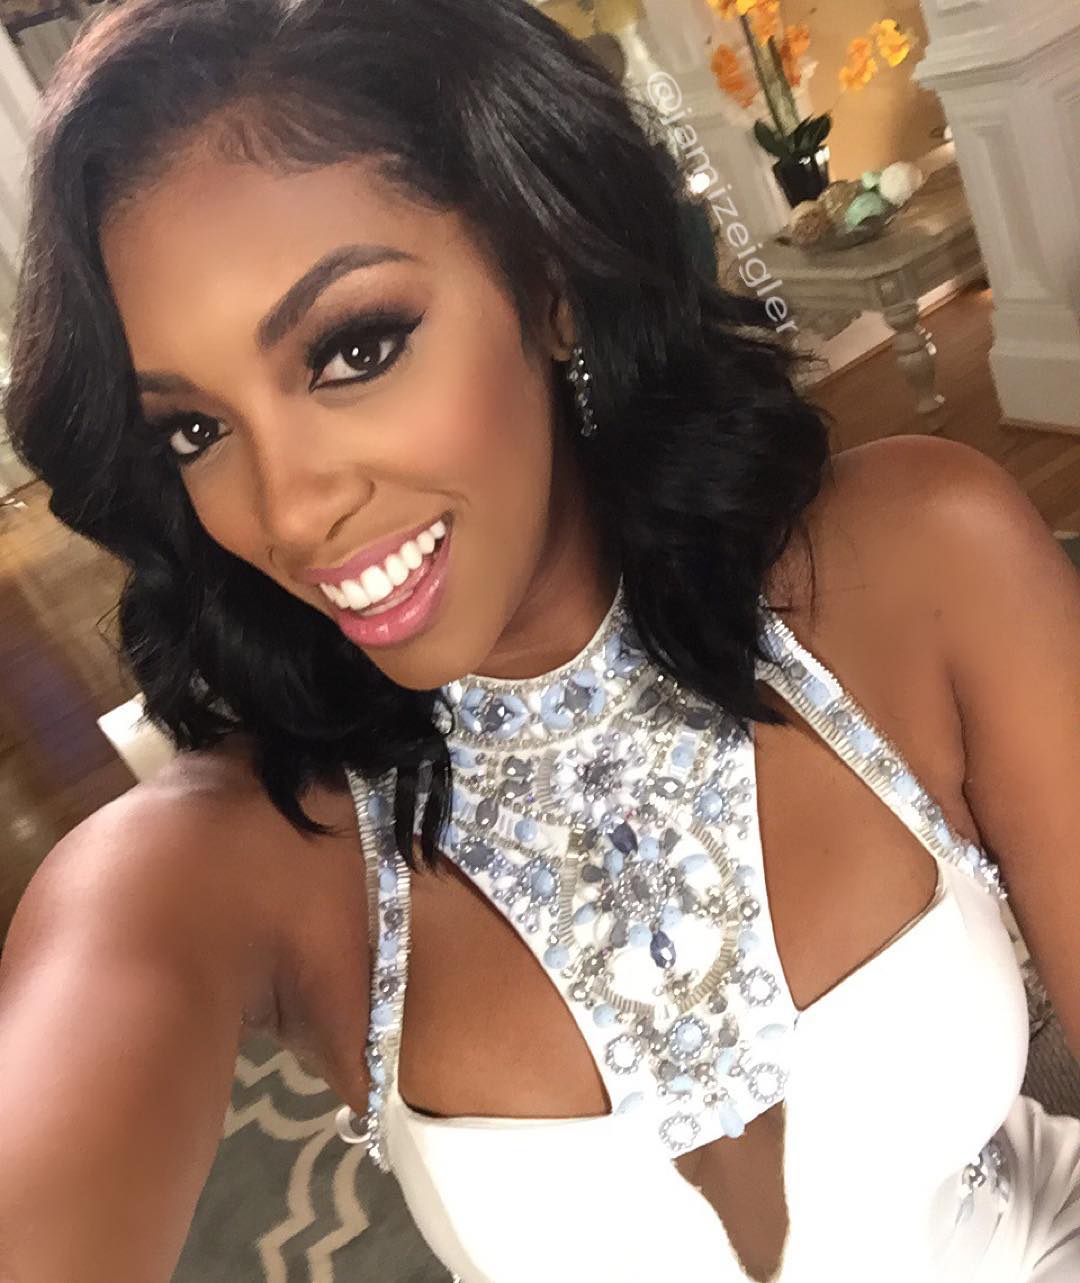 The Real Housewives of Atlanta’s" Porsha Williams and rapper turned ne...